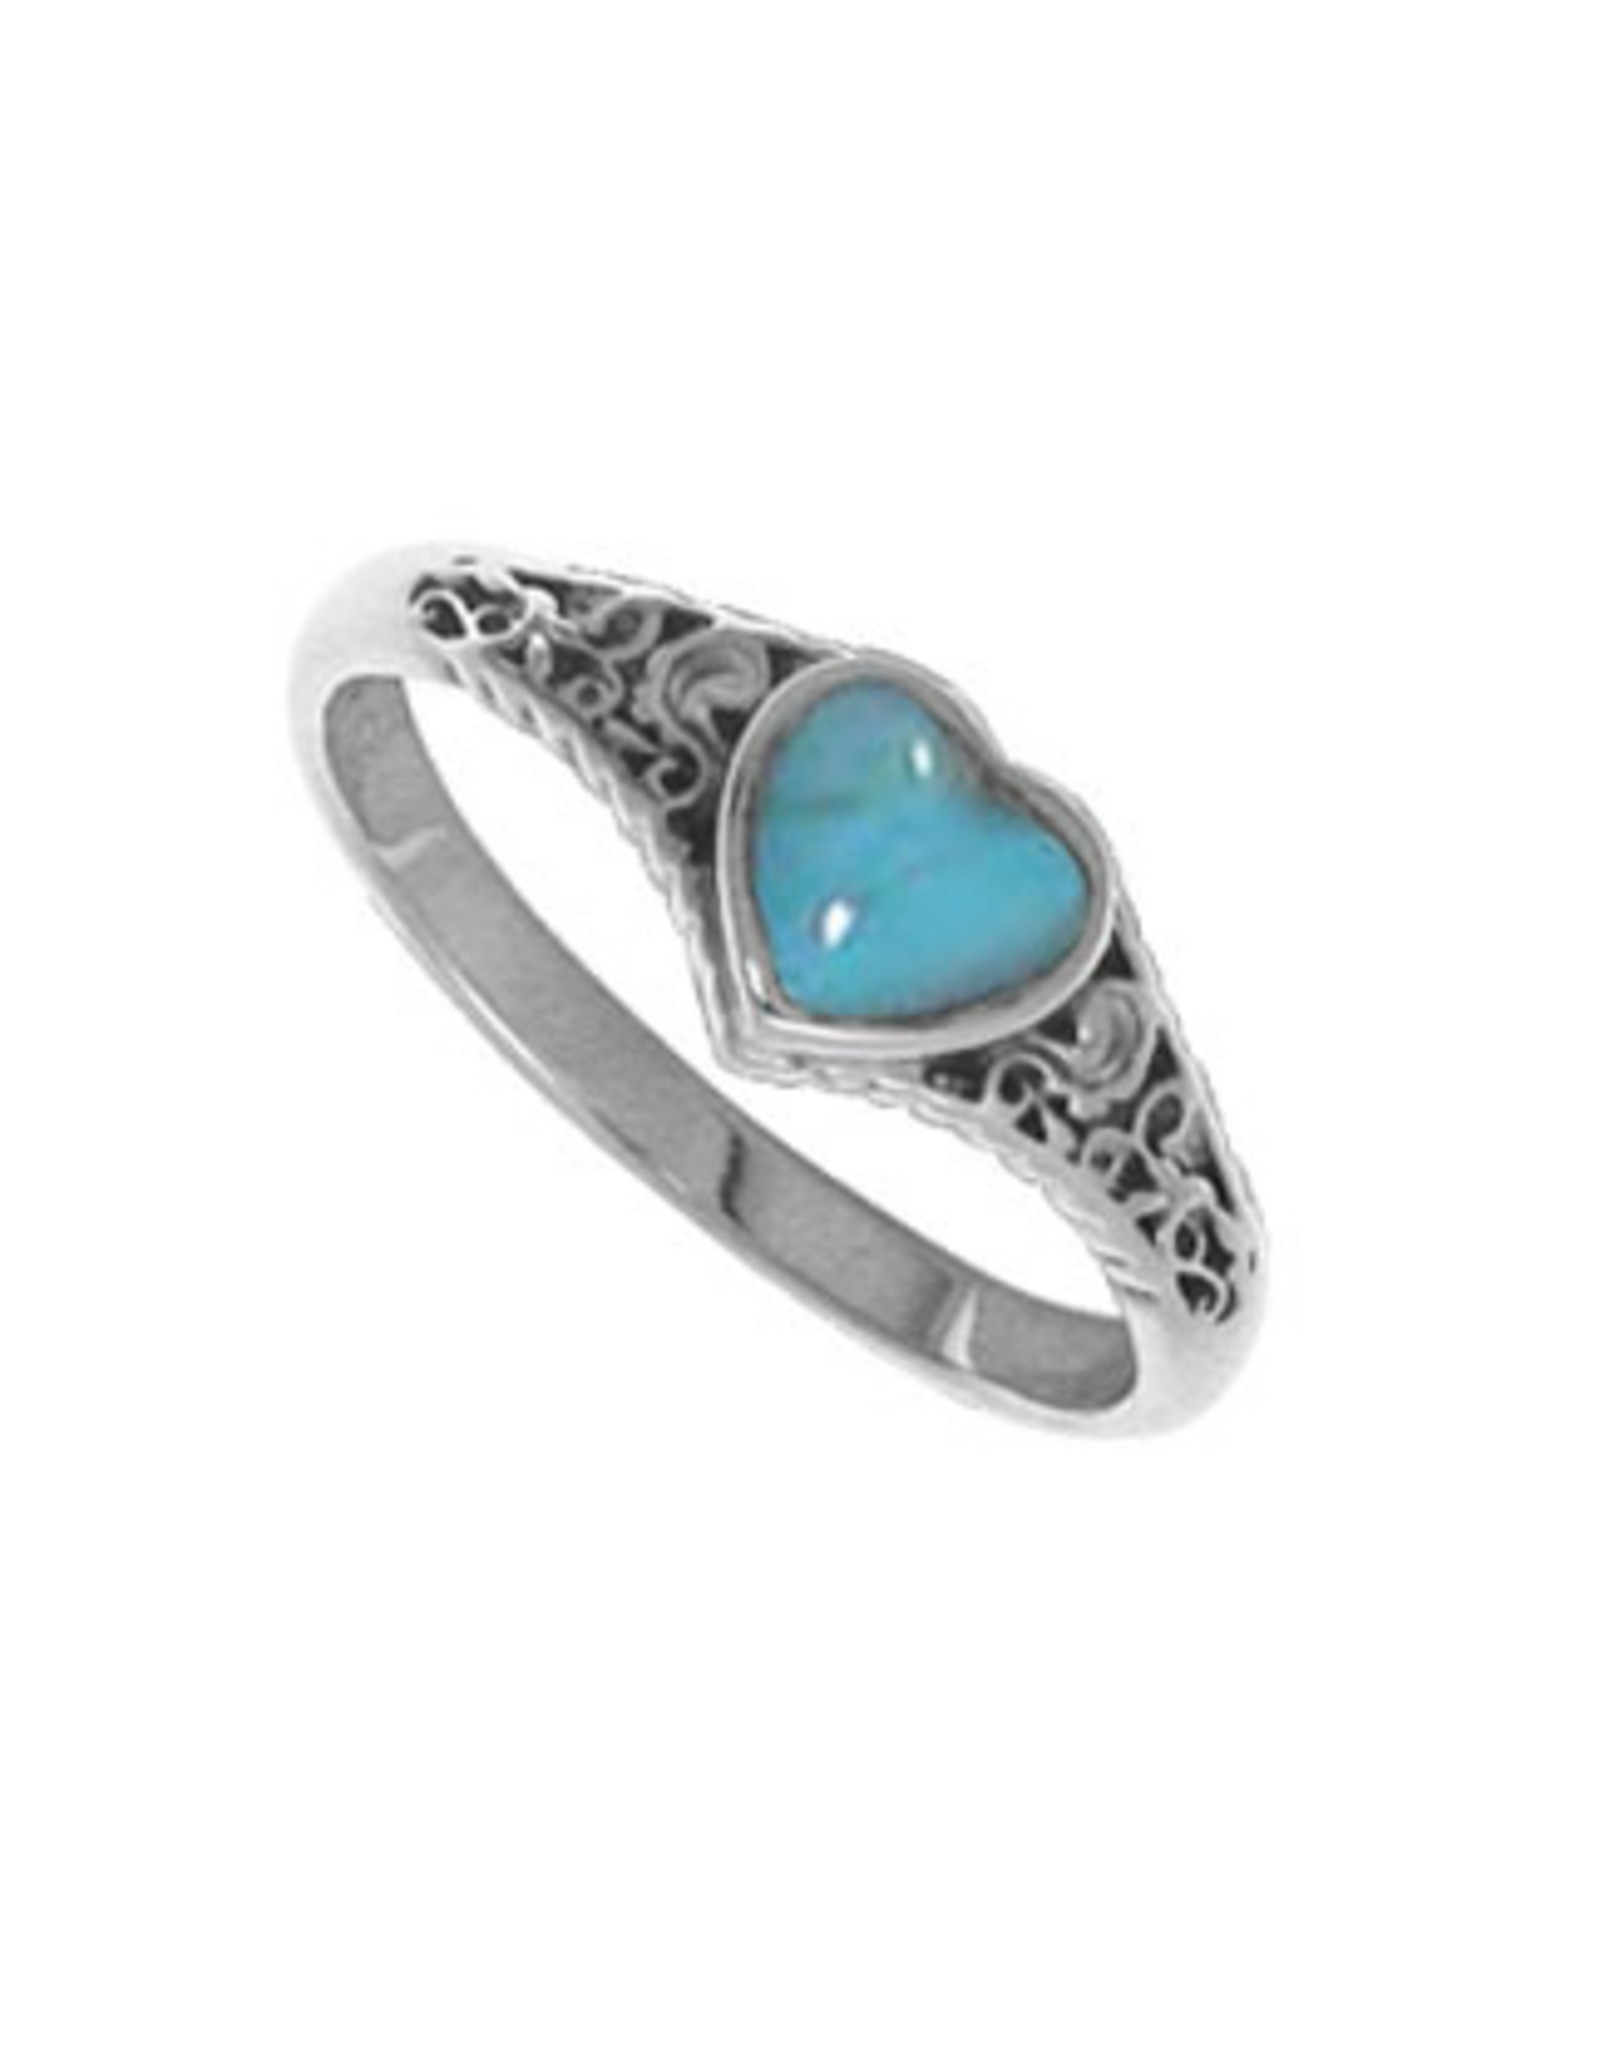 Boma HEART TURQUOISE  RING SILVER